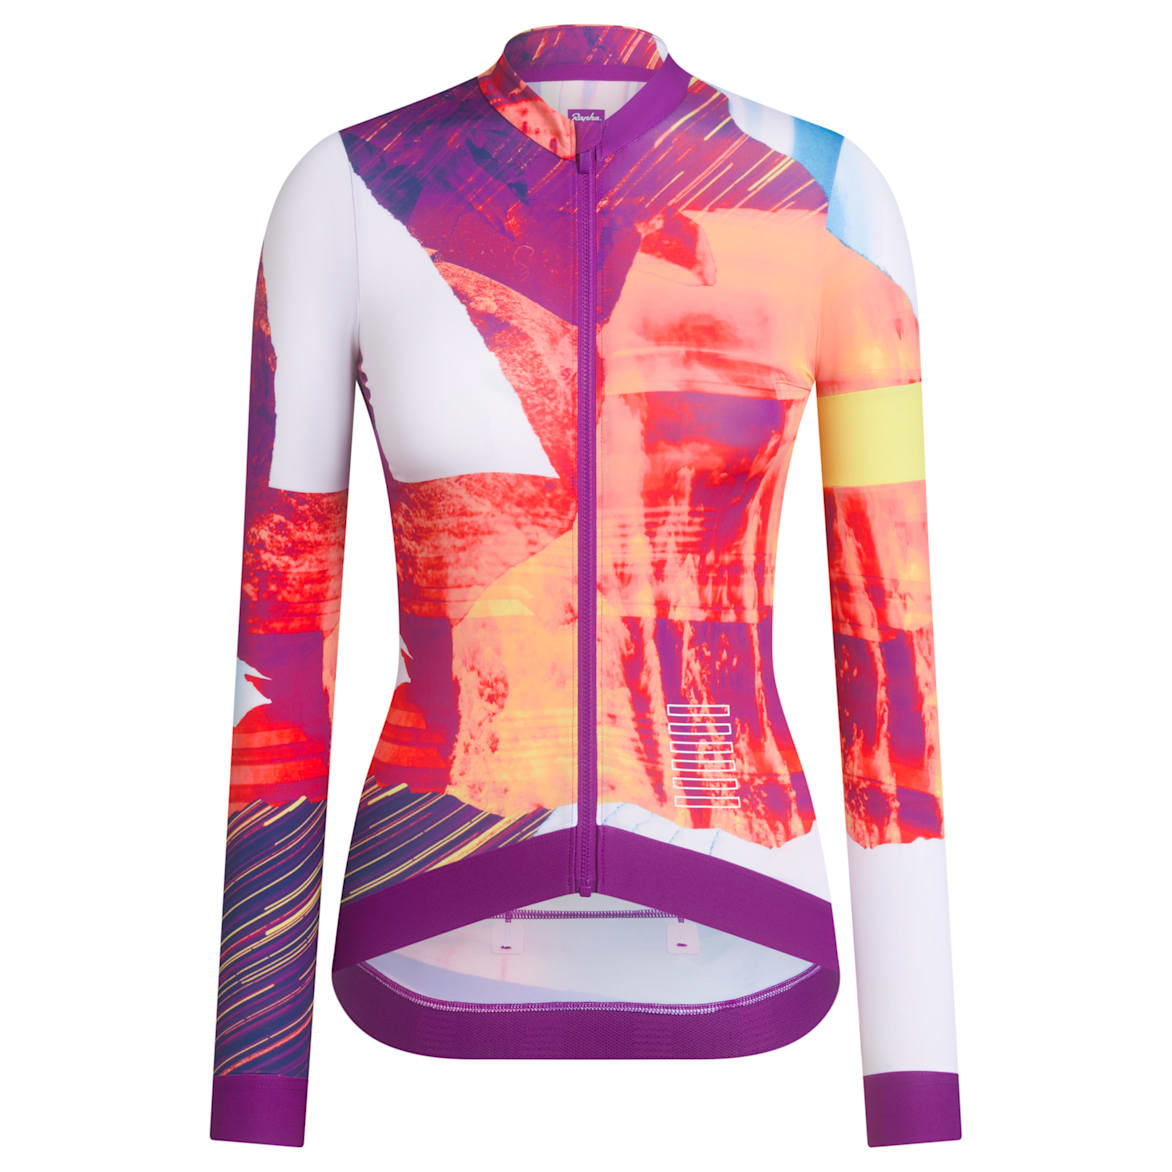 Women's Pro Team Long Sleeve Training Jersey - Collage Collection